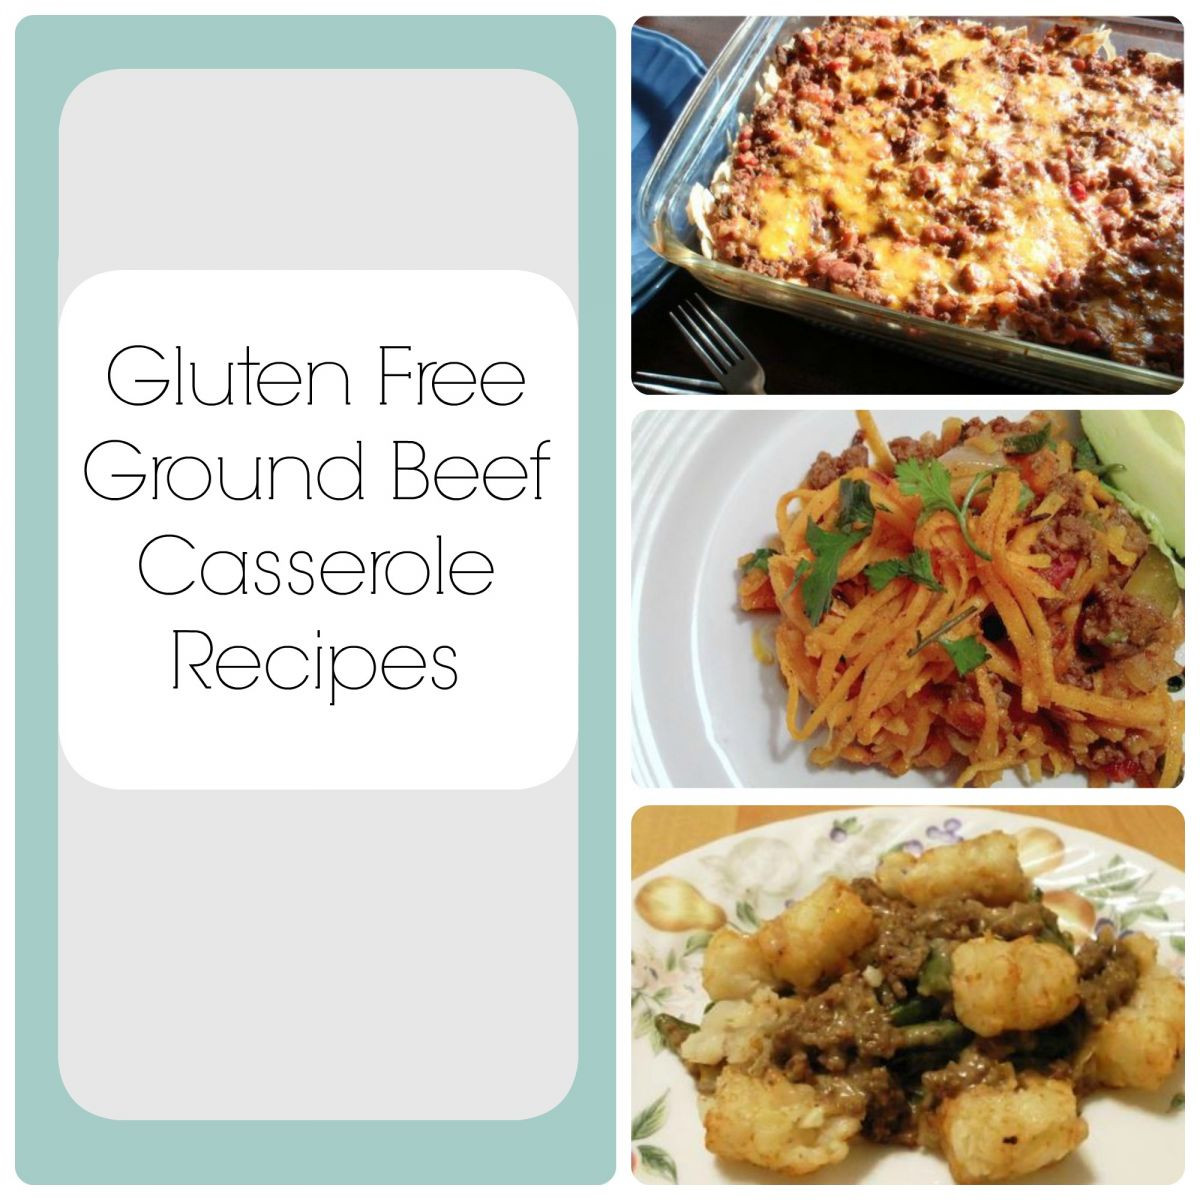 Dairy Free Ground Beef Recipes
 ly the Best Gluten Free Recipes 8 Ground Beef Casserole